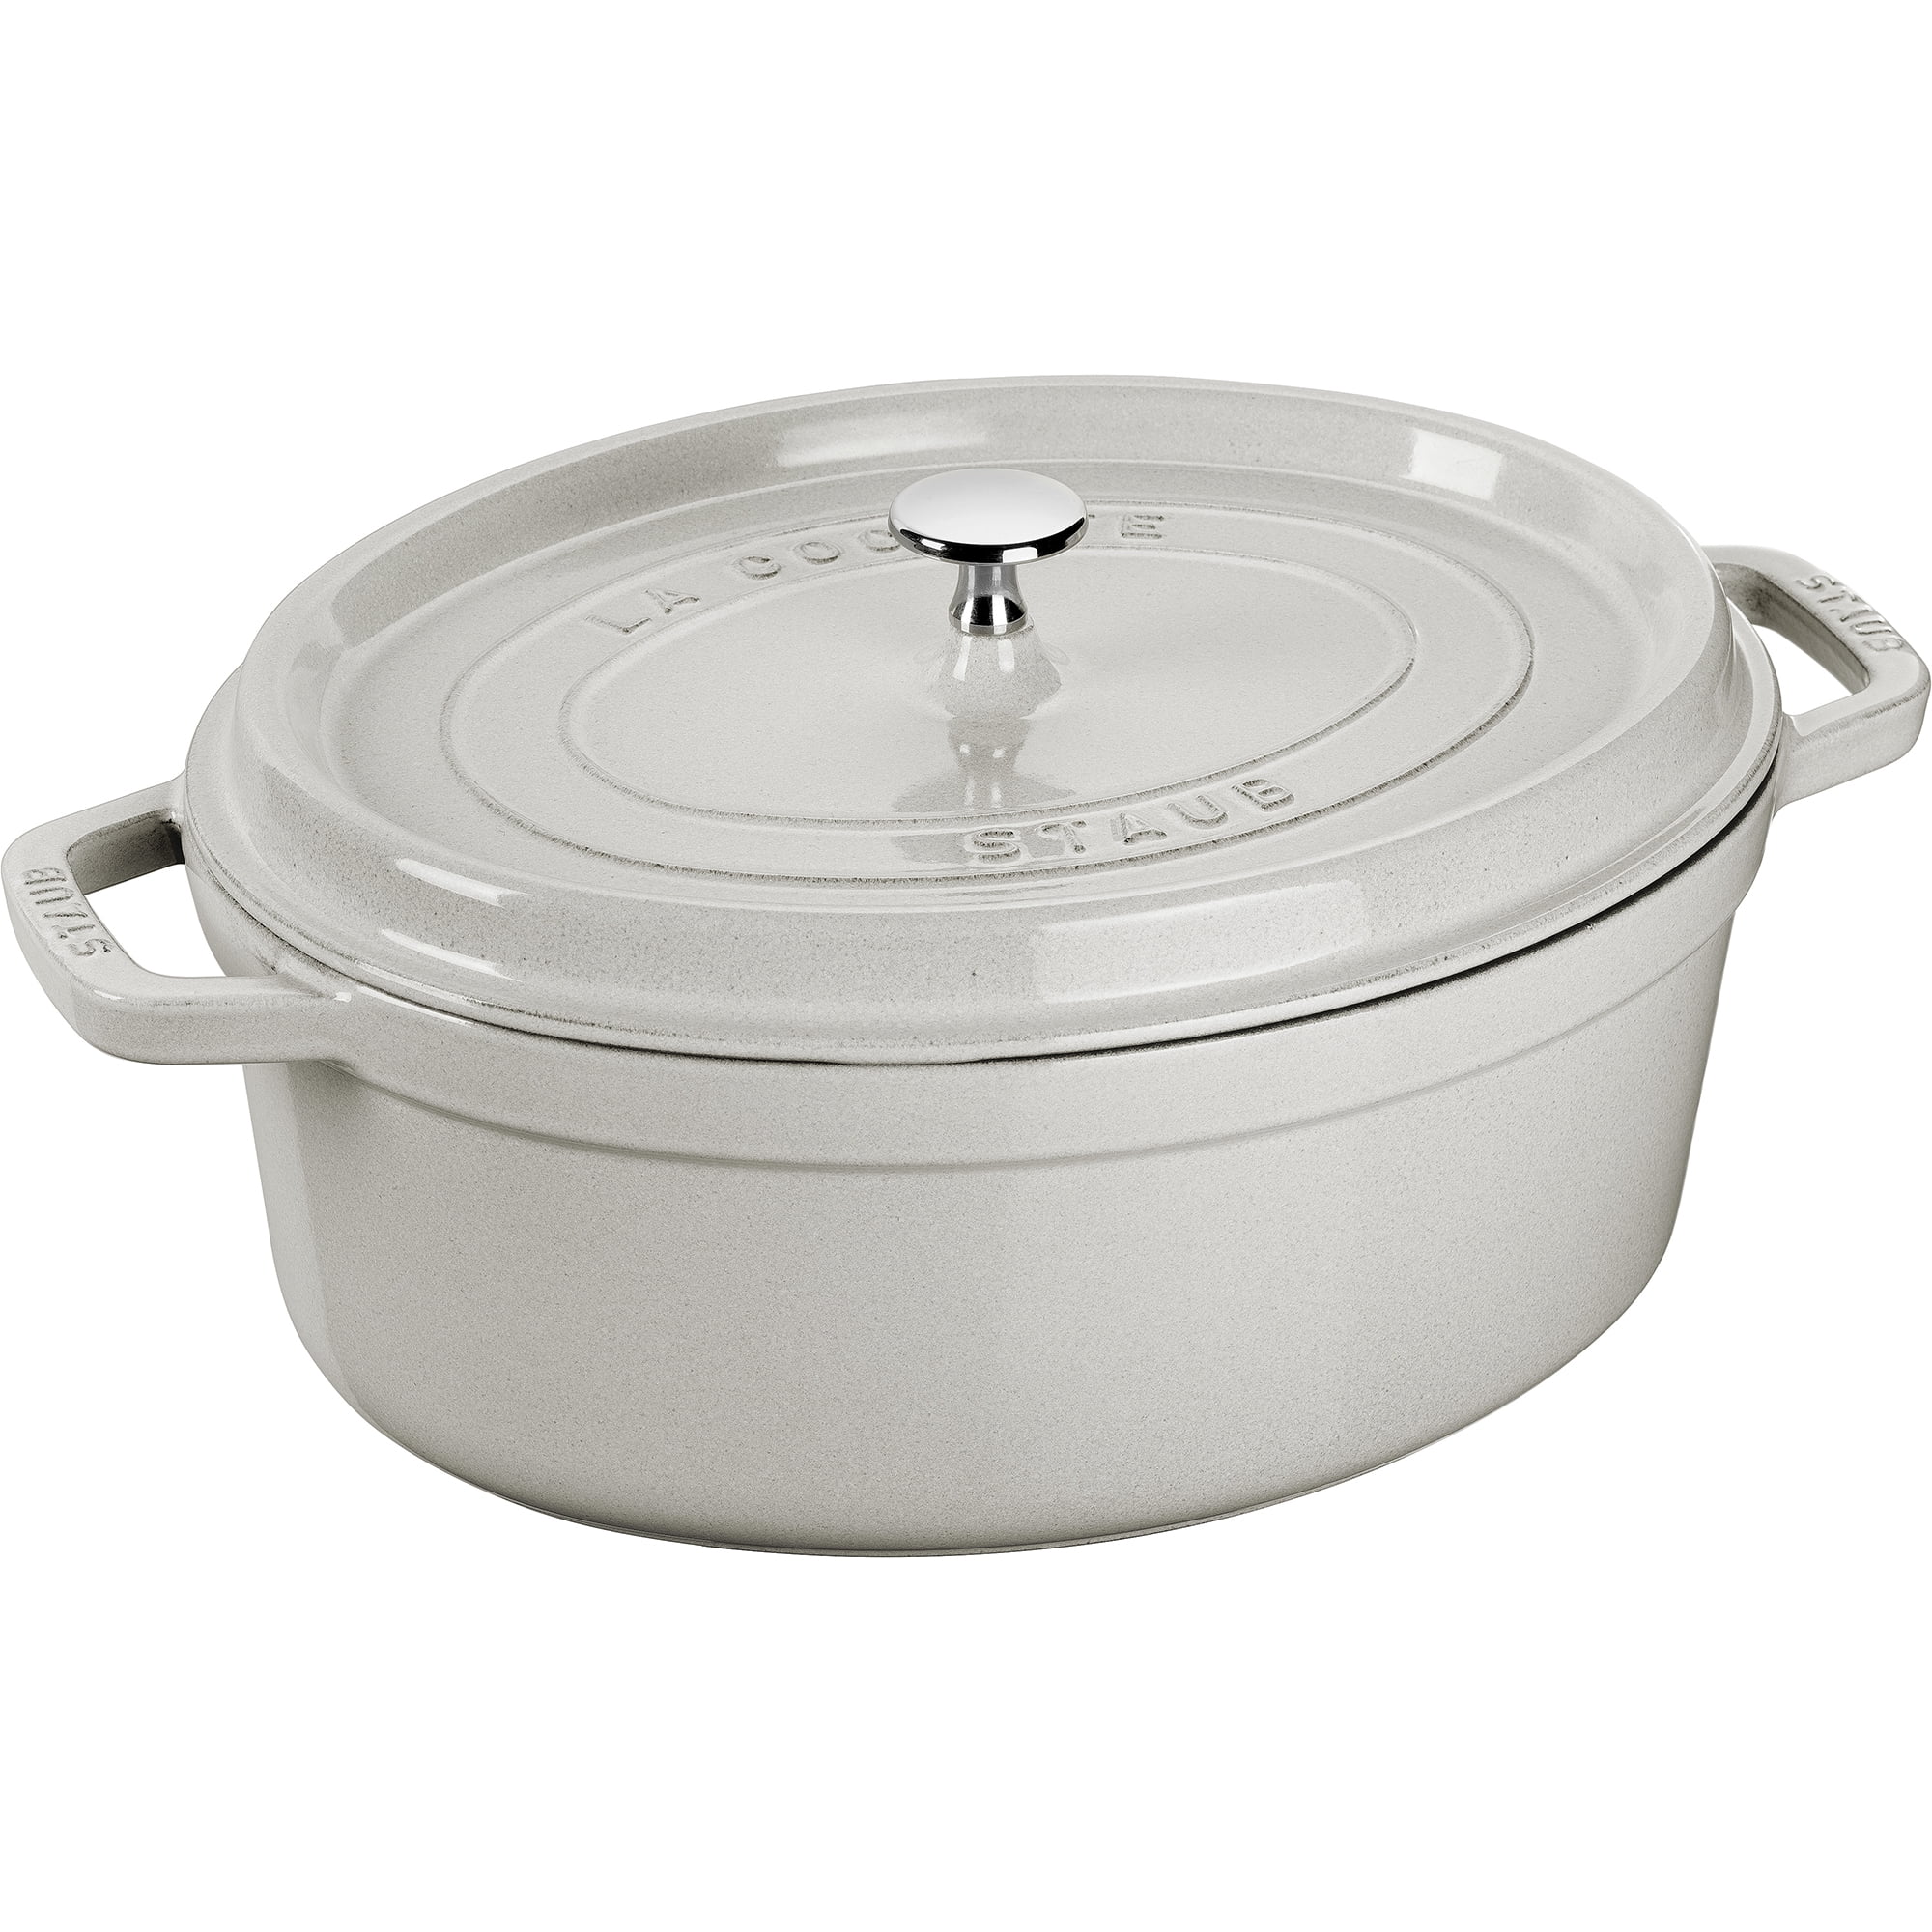 Staub Cast Iron Oval Cocotte, Dutch Oven, 5.75-quart, serves 5-6, Made in  France, Graphite, 5.75-qt - Pick 'n Save